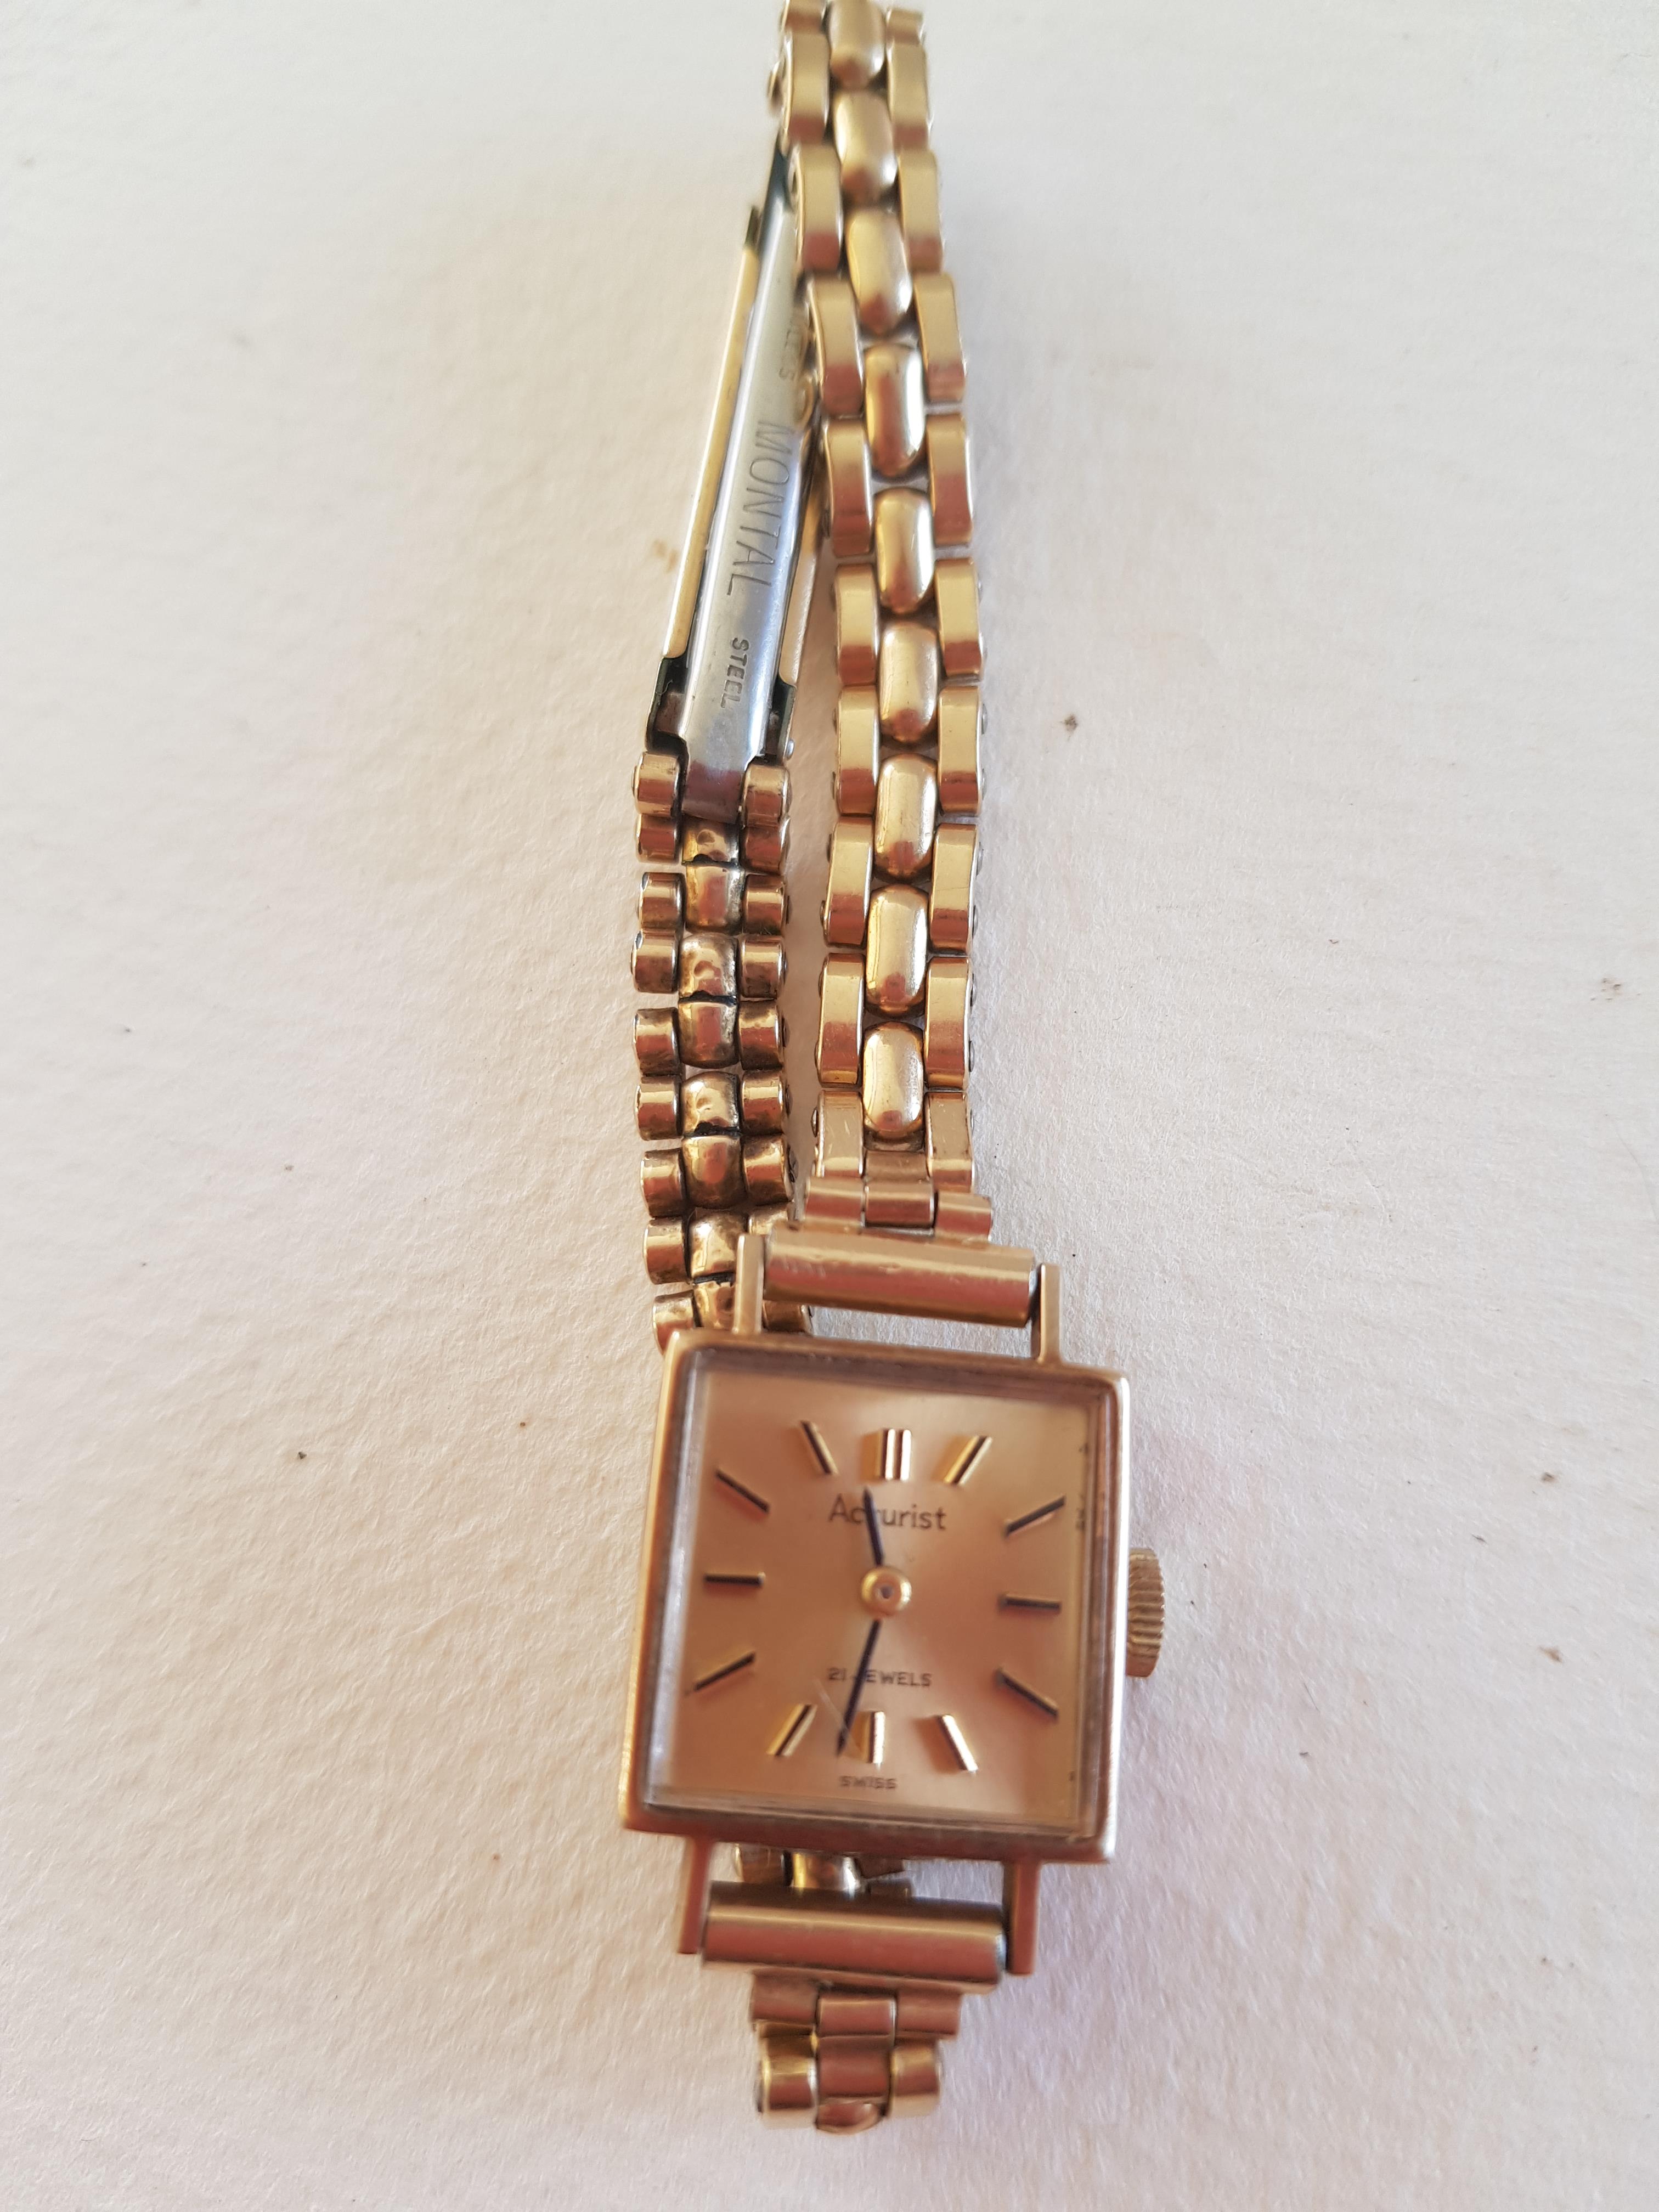 Ladies 9ct Gold Cased Accurist Watch - Image 2 of 3